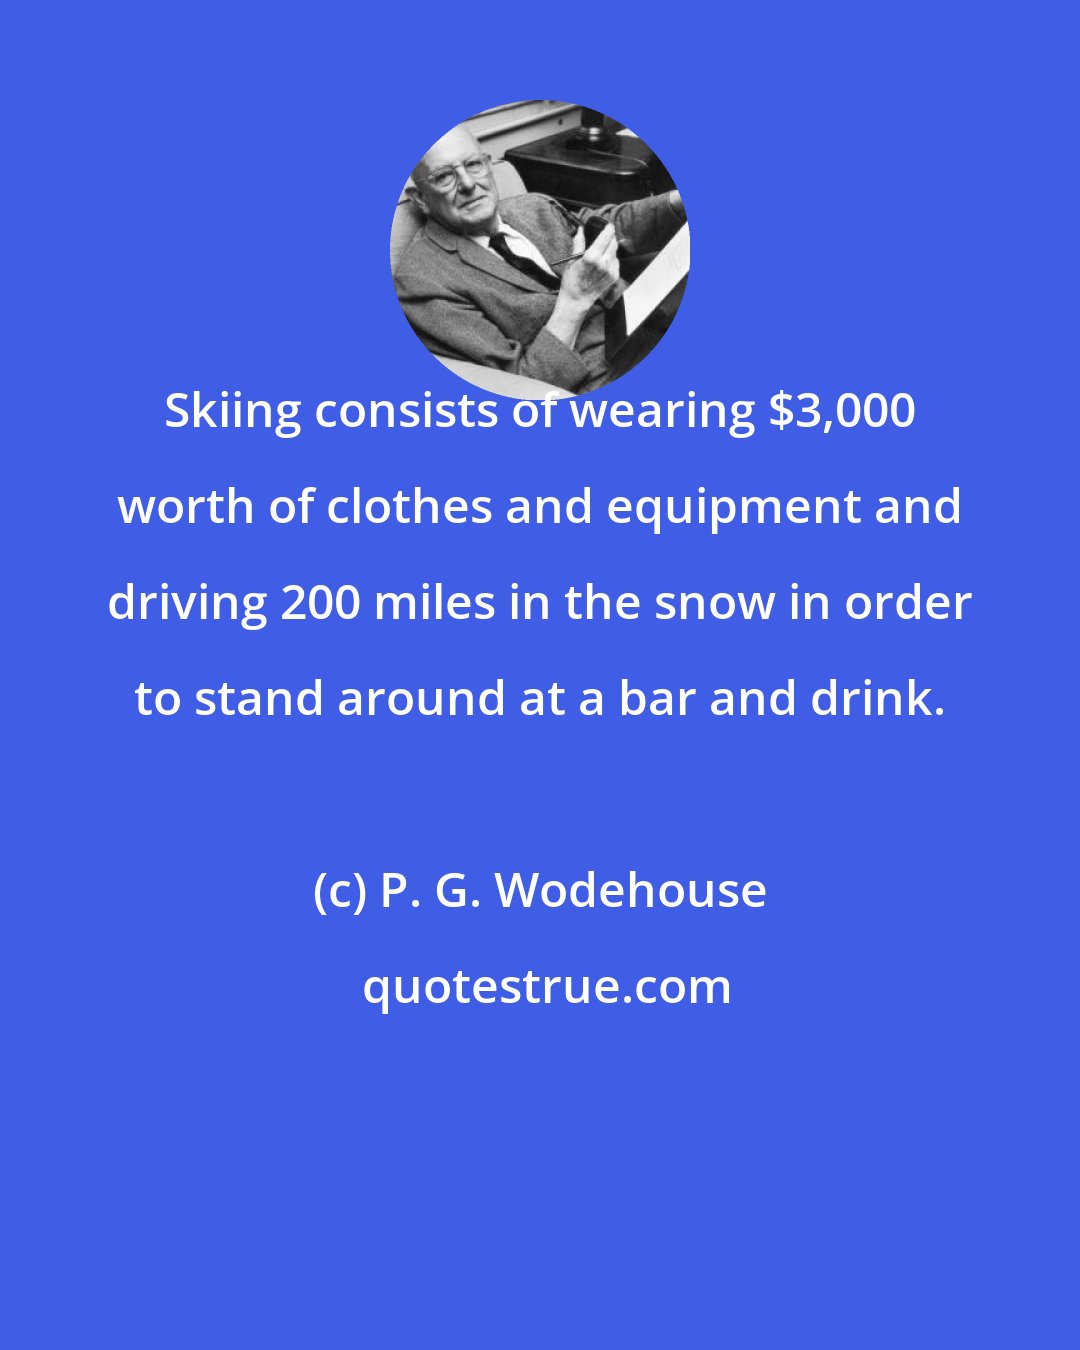 P. G. Wodehouse: Skiing consists of wearing $3,000 worth of clothes and equipment and driving 200 miles in the snow in order to stand around at a bar and drink.